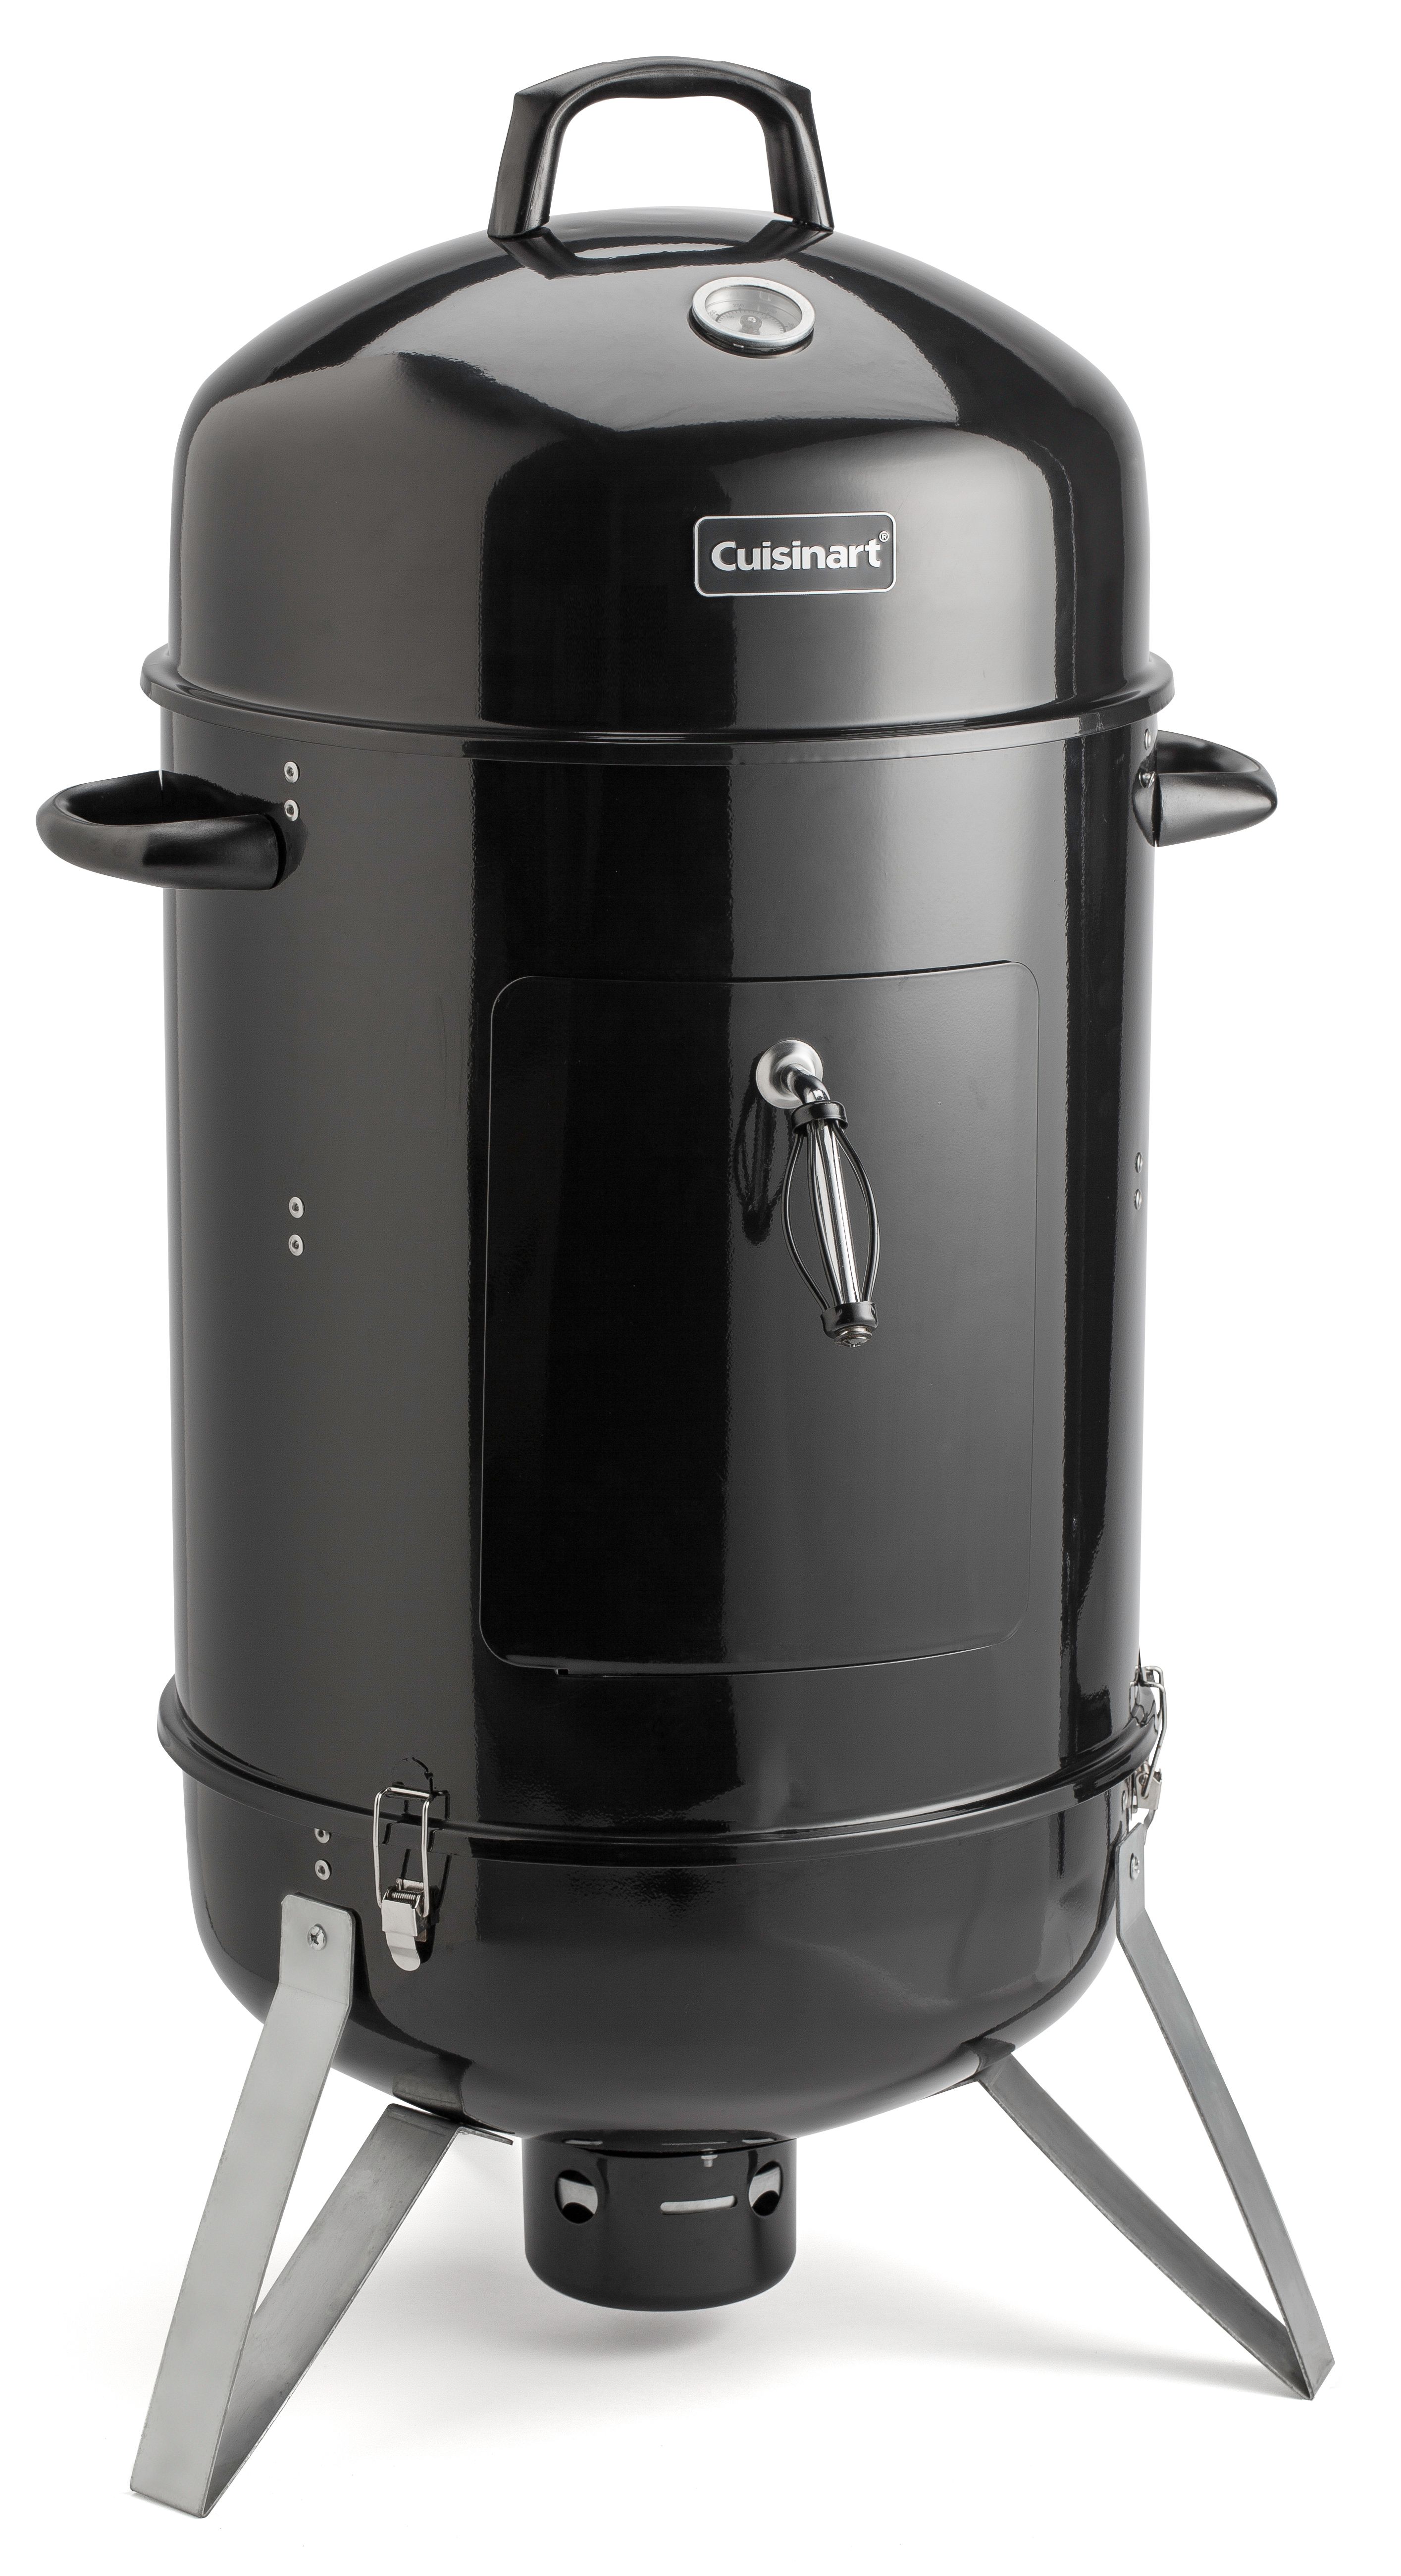 Cuisinart COS-118 Vertical 18 Inch Charcoal Smoker Grill with Dual Vents, Black - image 1 of 7